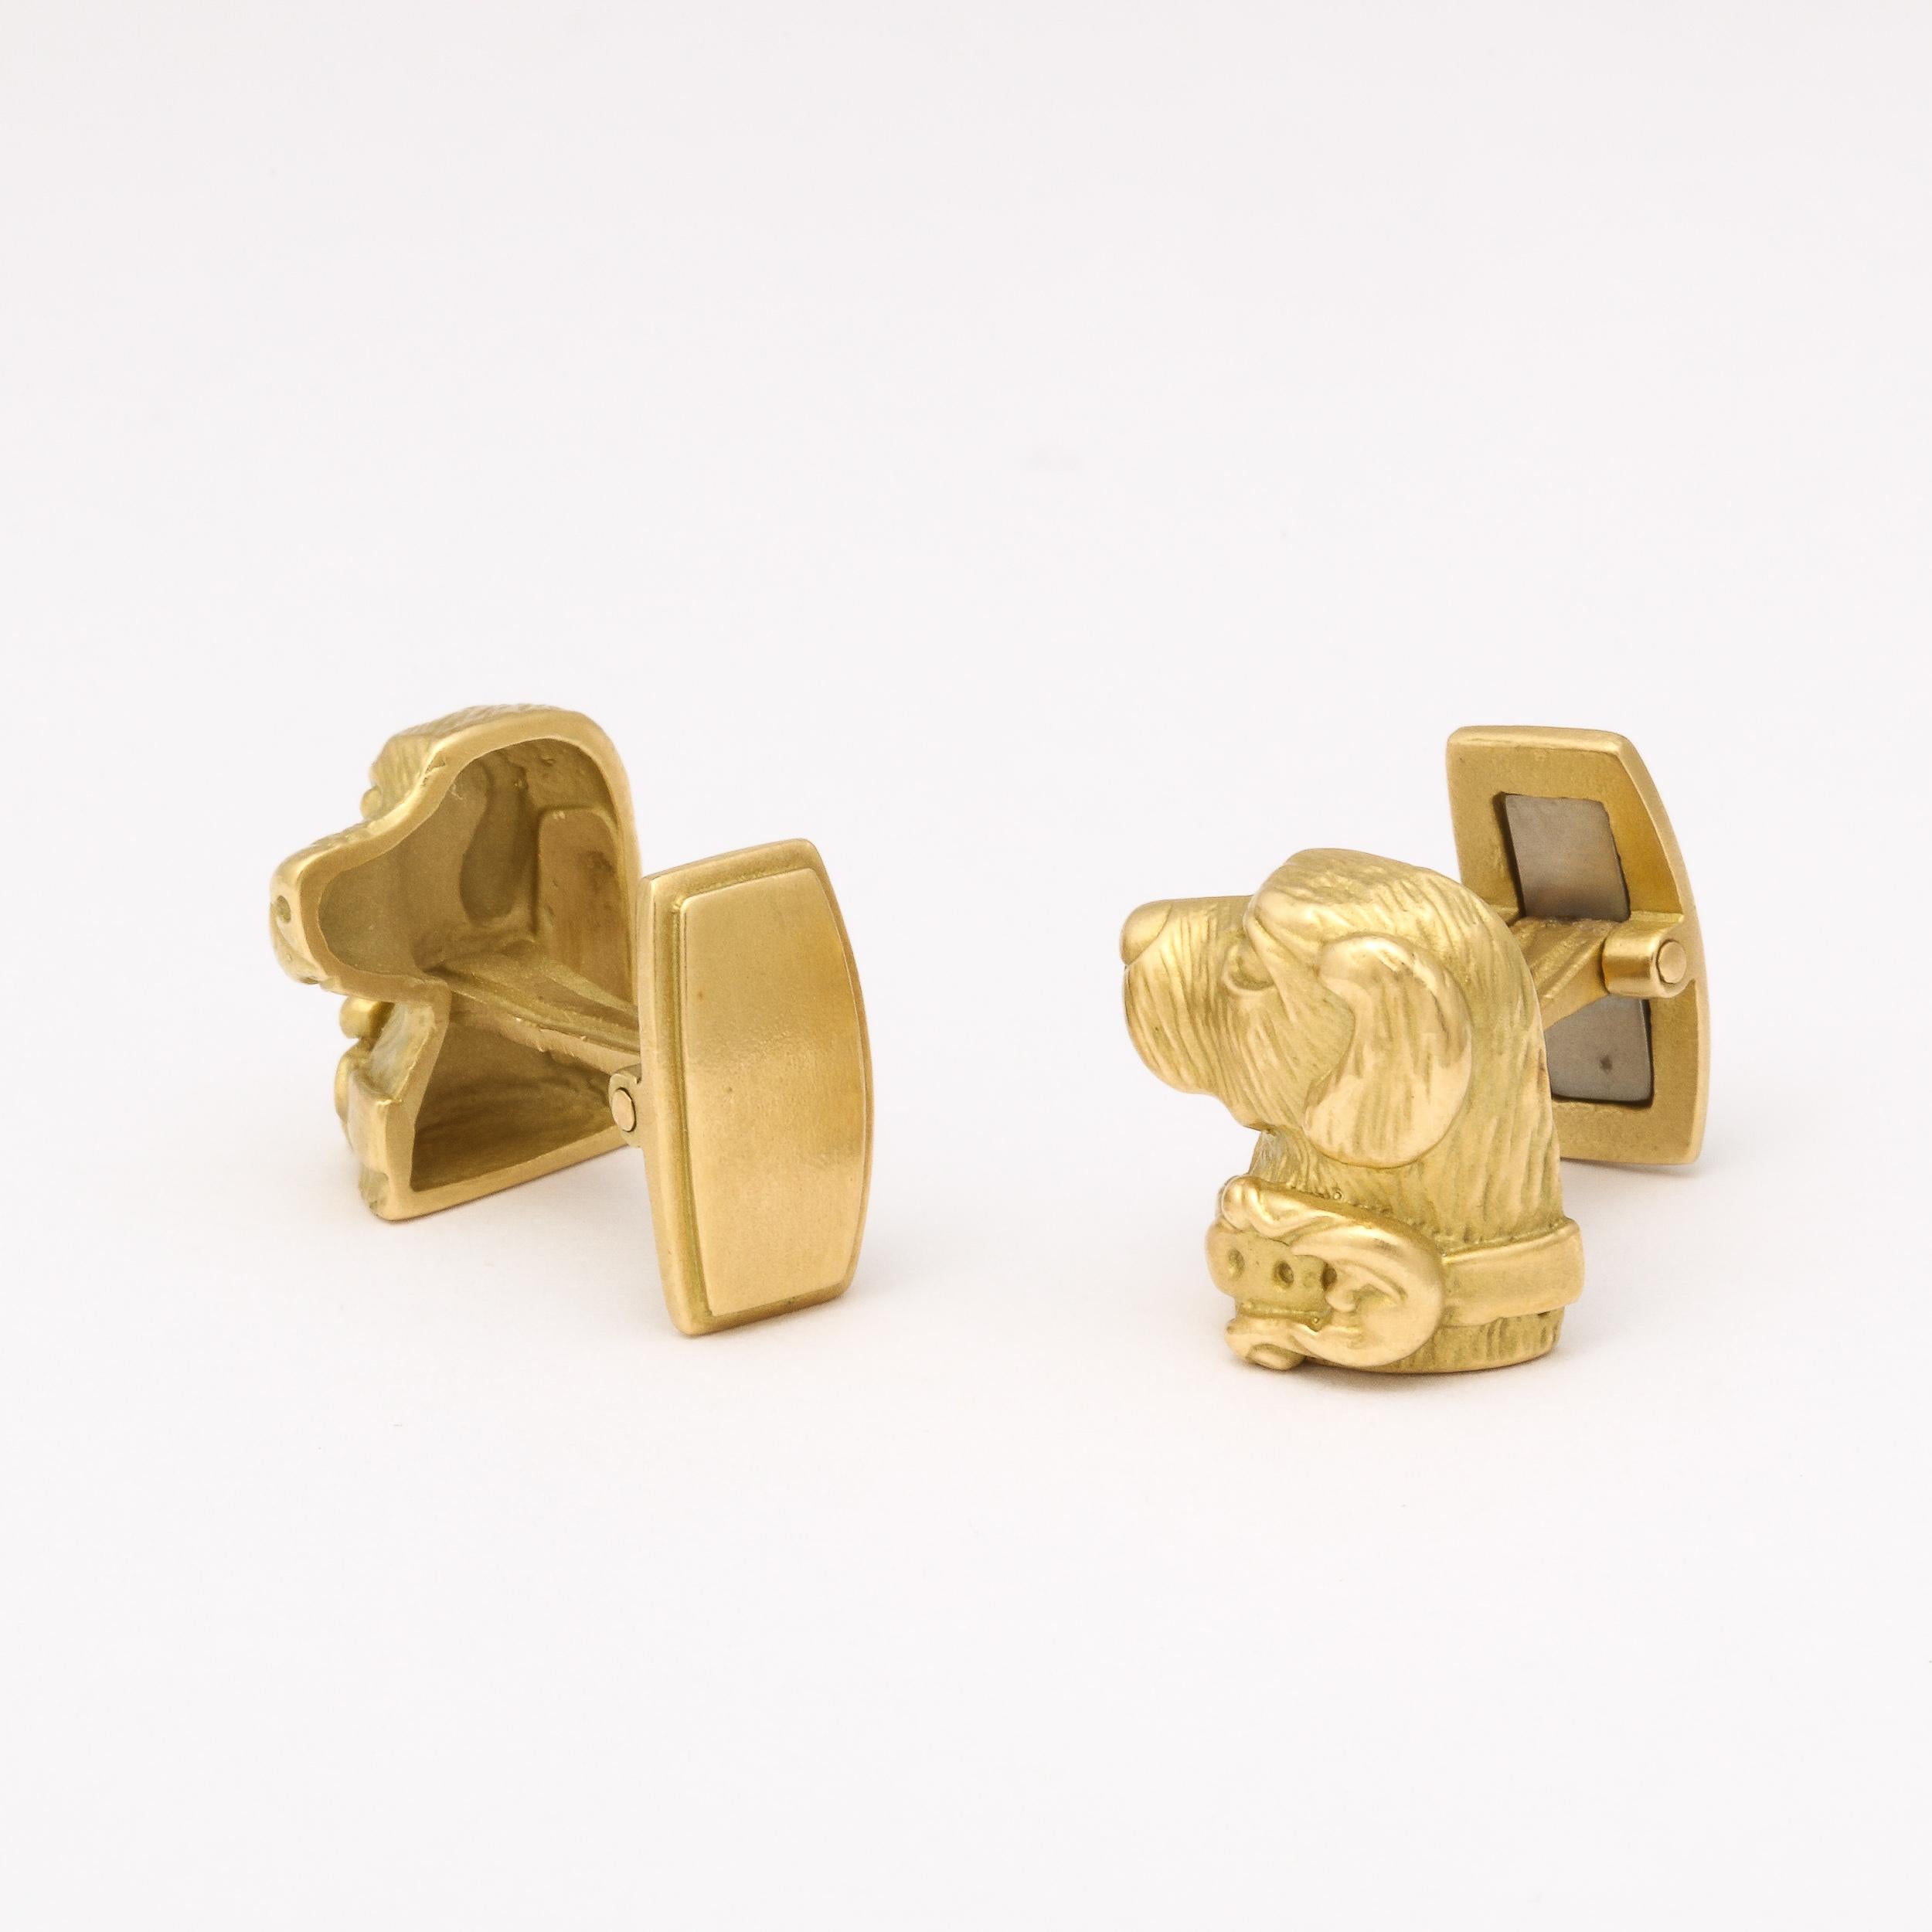 Modernist Cufflinks with Golden Retriever Canine Motif in 14 Carat Yellow Gold For Sale 5